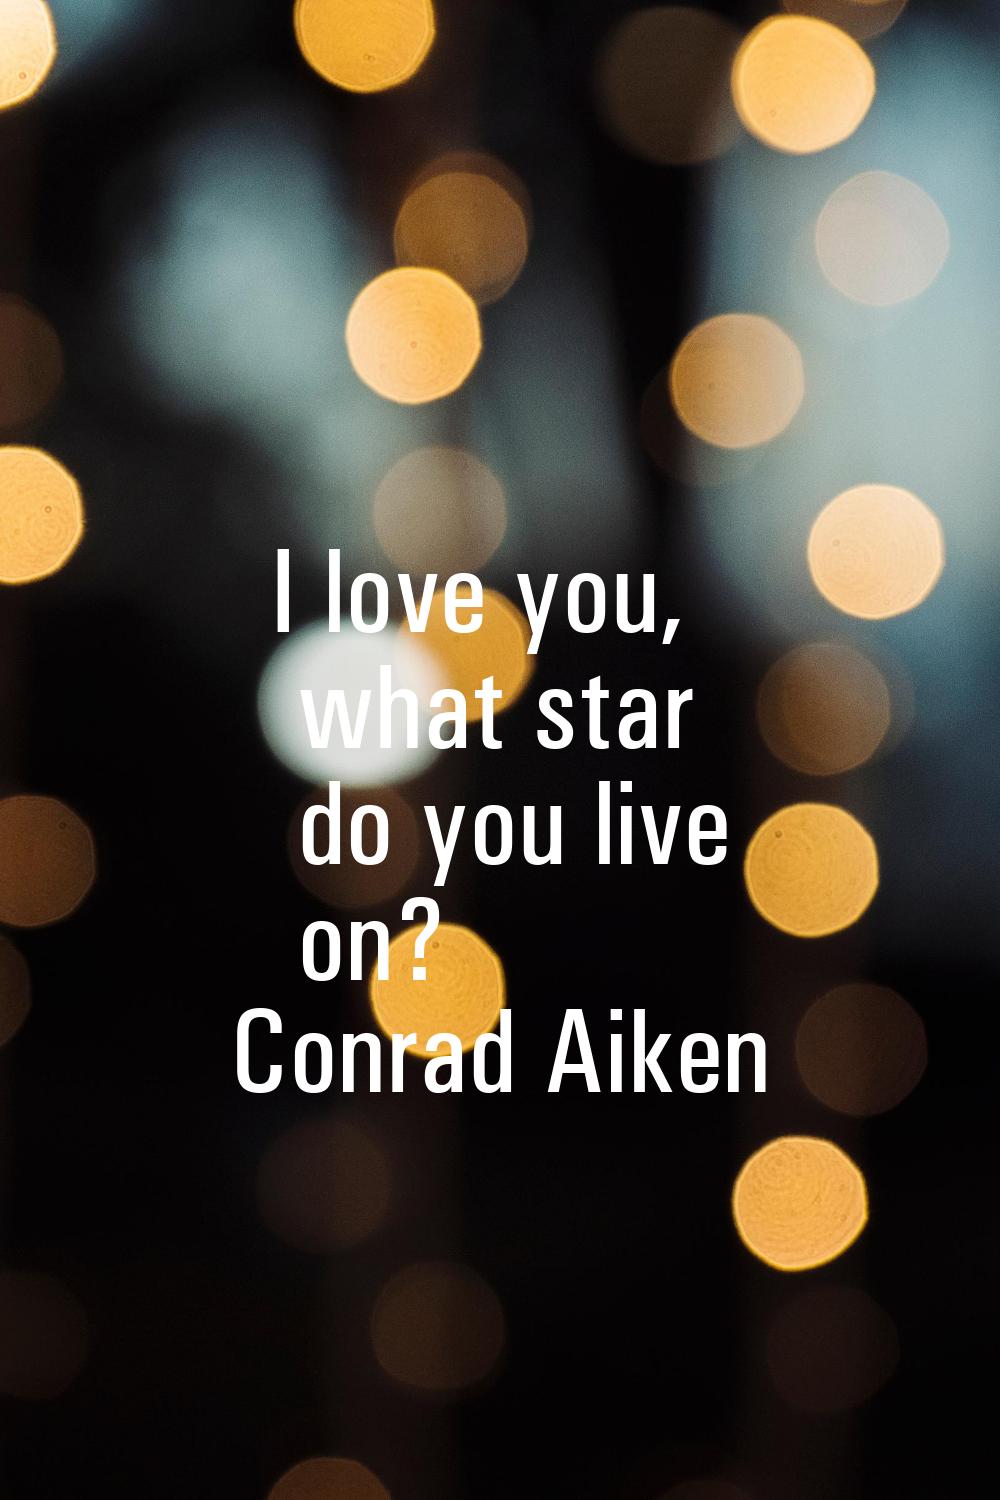 I love you, what star do you live on?